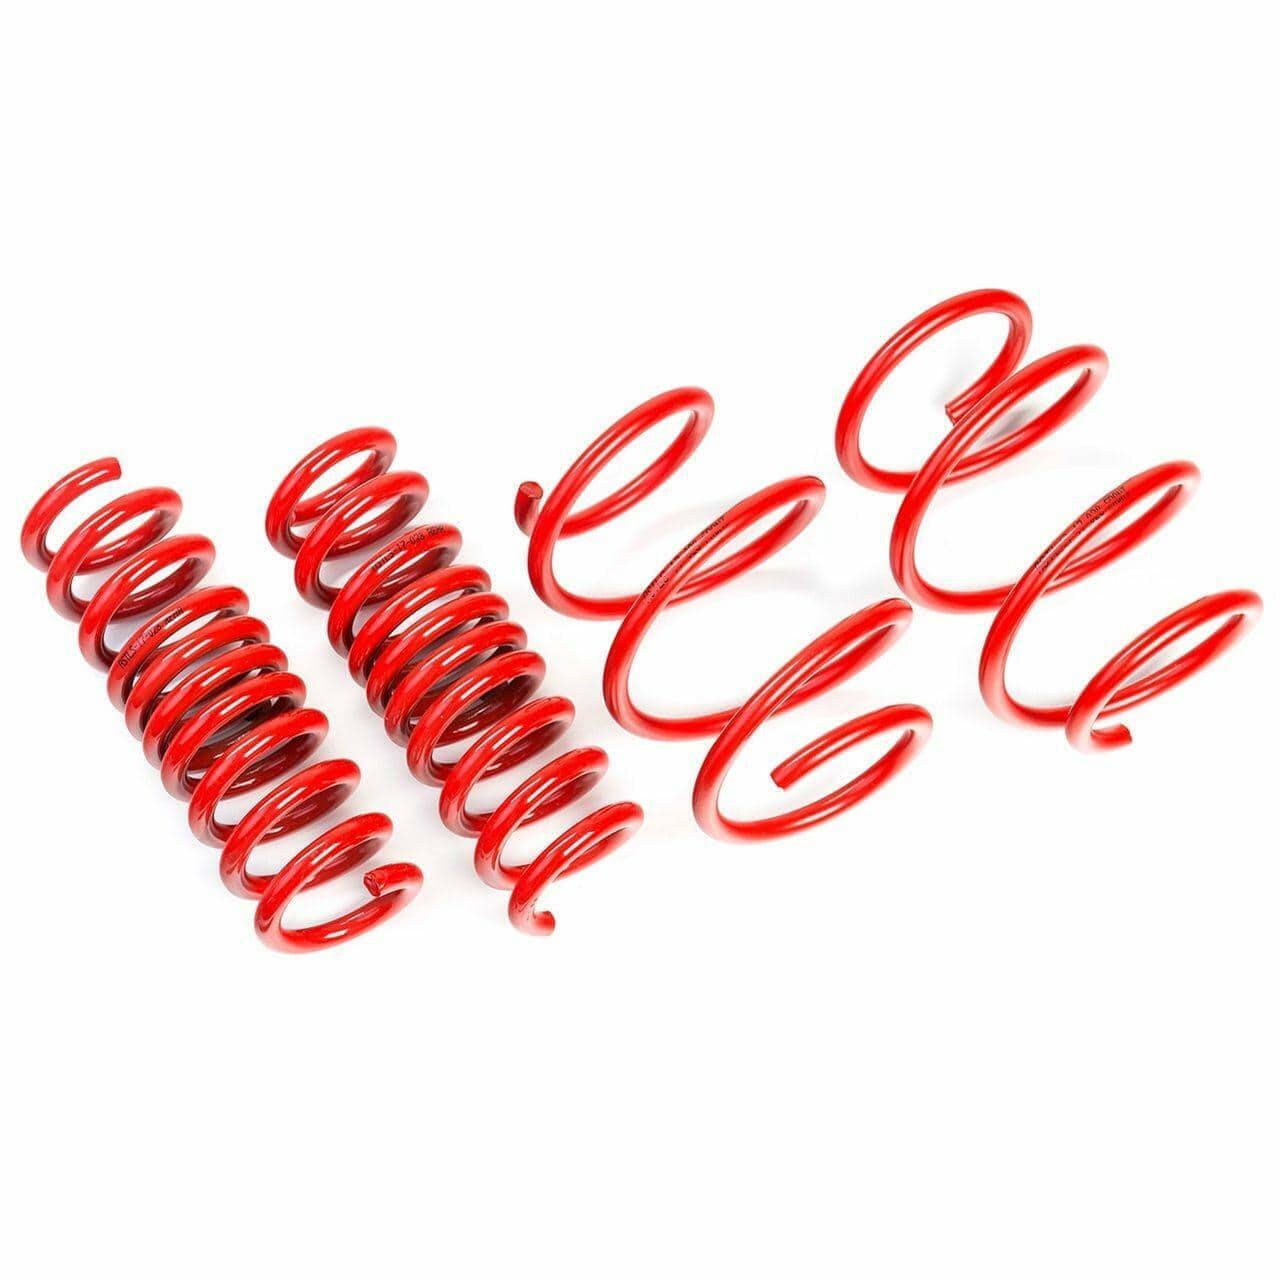 AST Suspension Lowering Springs (40MM/40MM TUV) - 1995-2002 Mercedes-Benz E-Class 4-5CYL (W210) ASTLS-14-1264